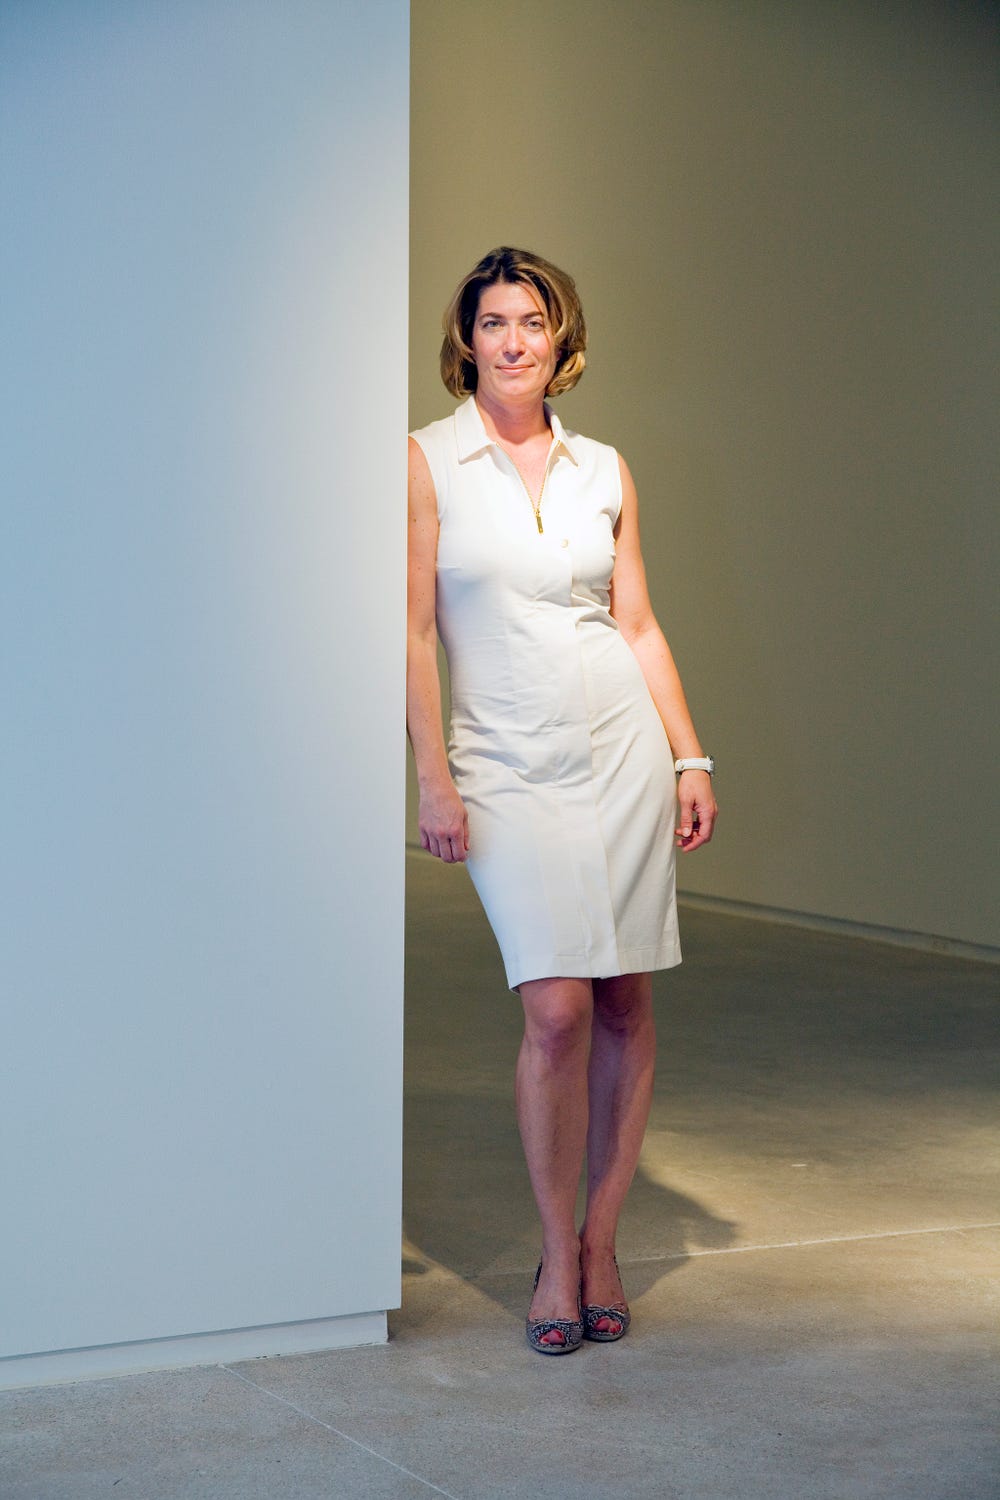 Photograph of woman in white dress leaning against wall.